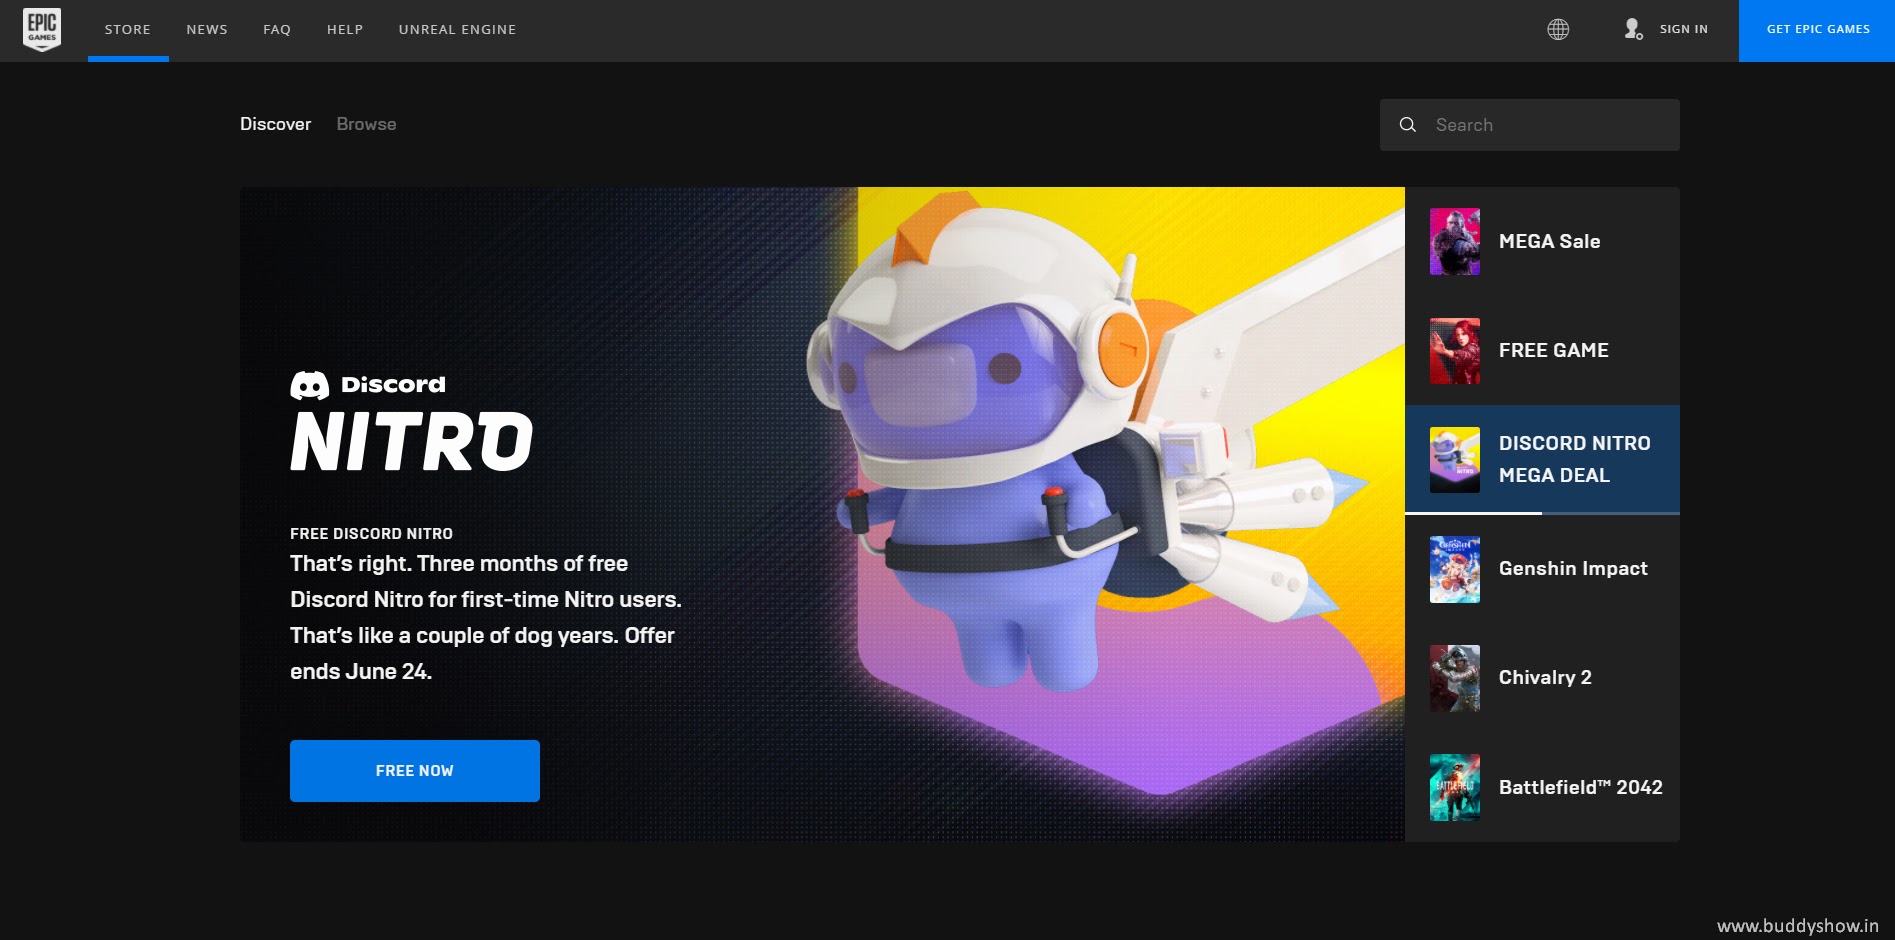 How to Redeem 3 Months of Free Discord Nitro?